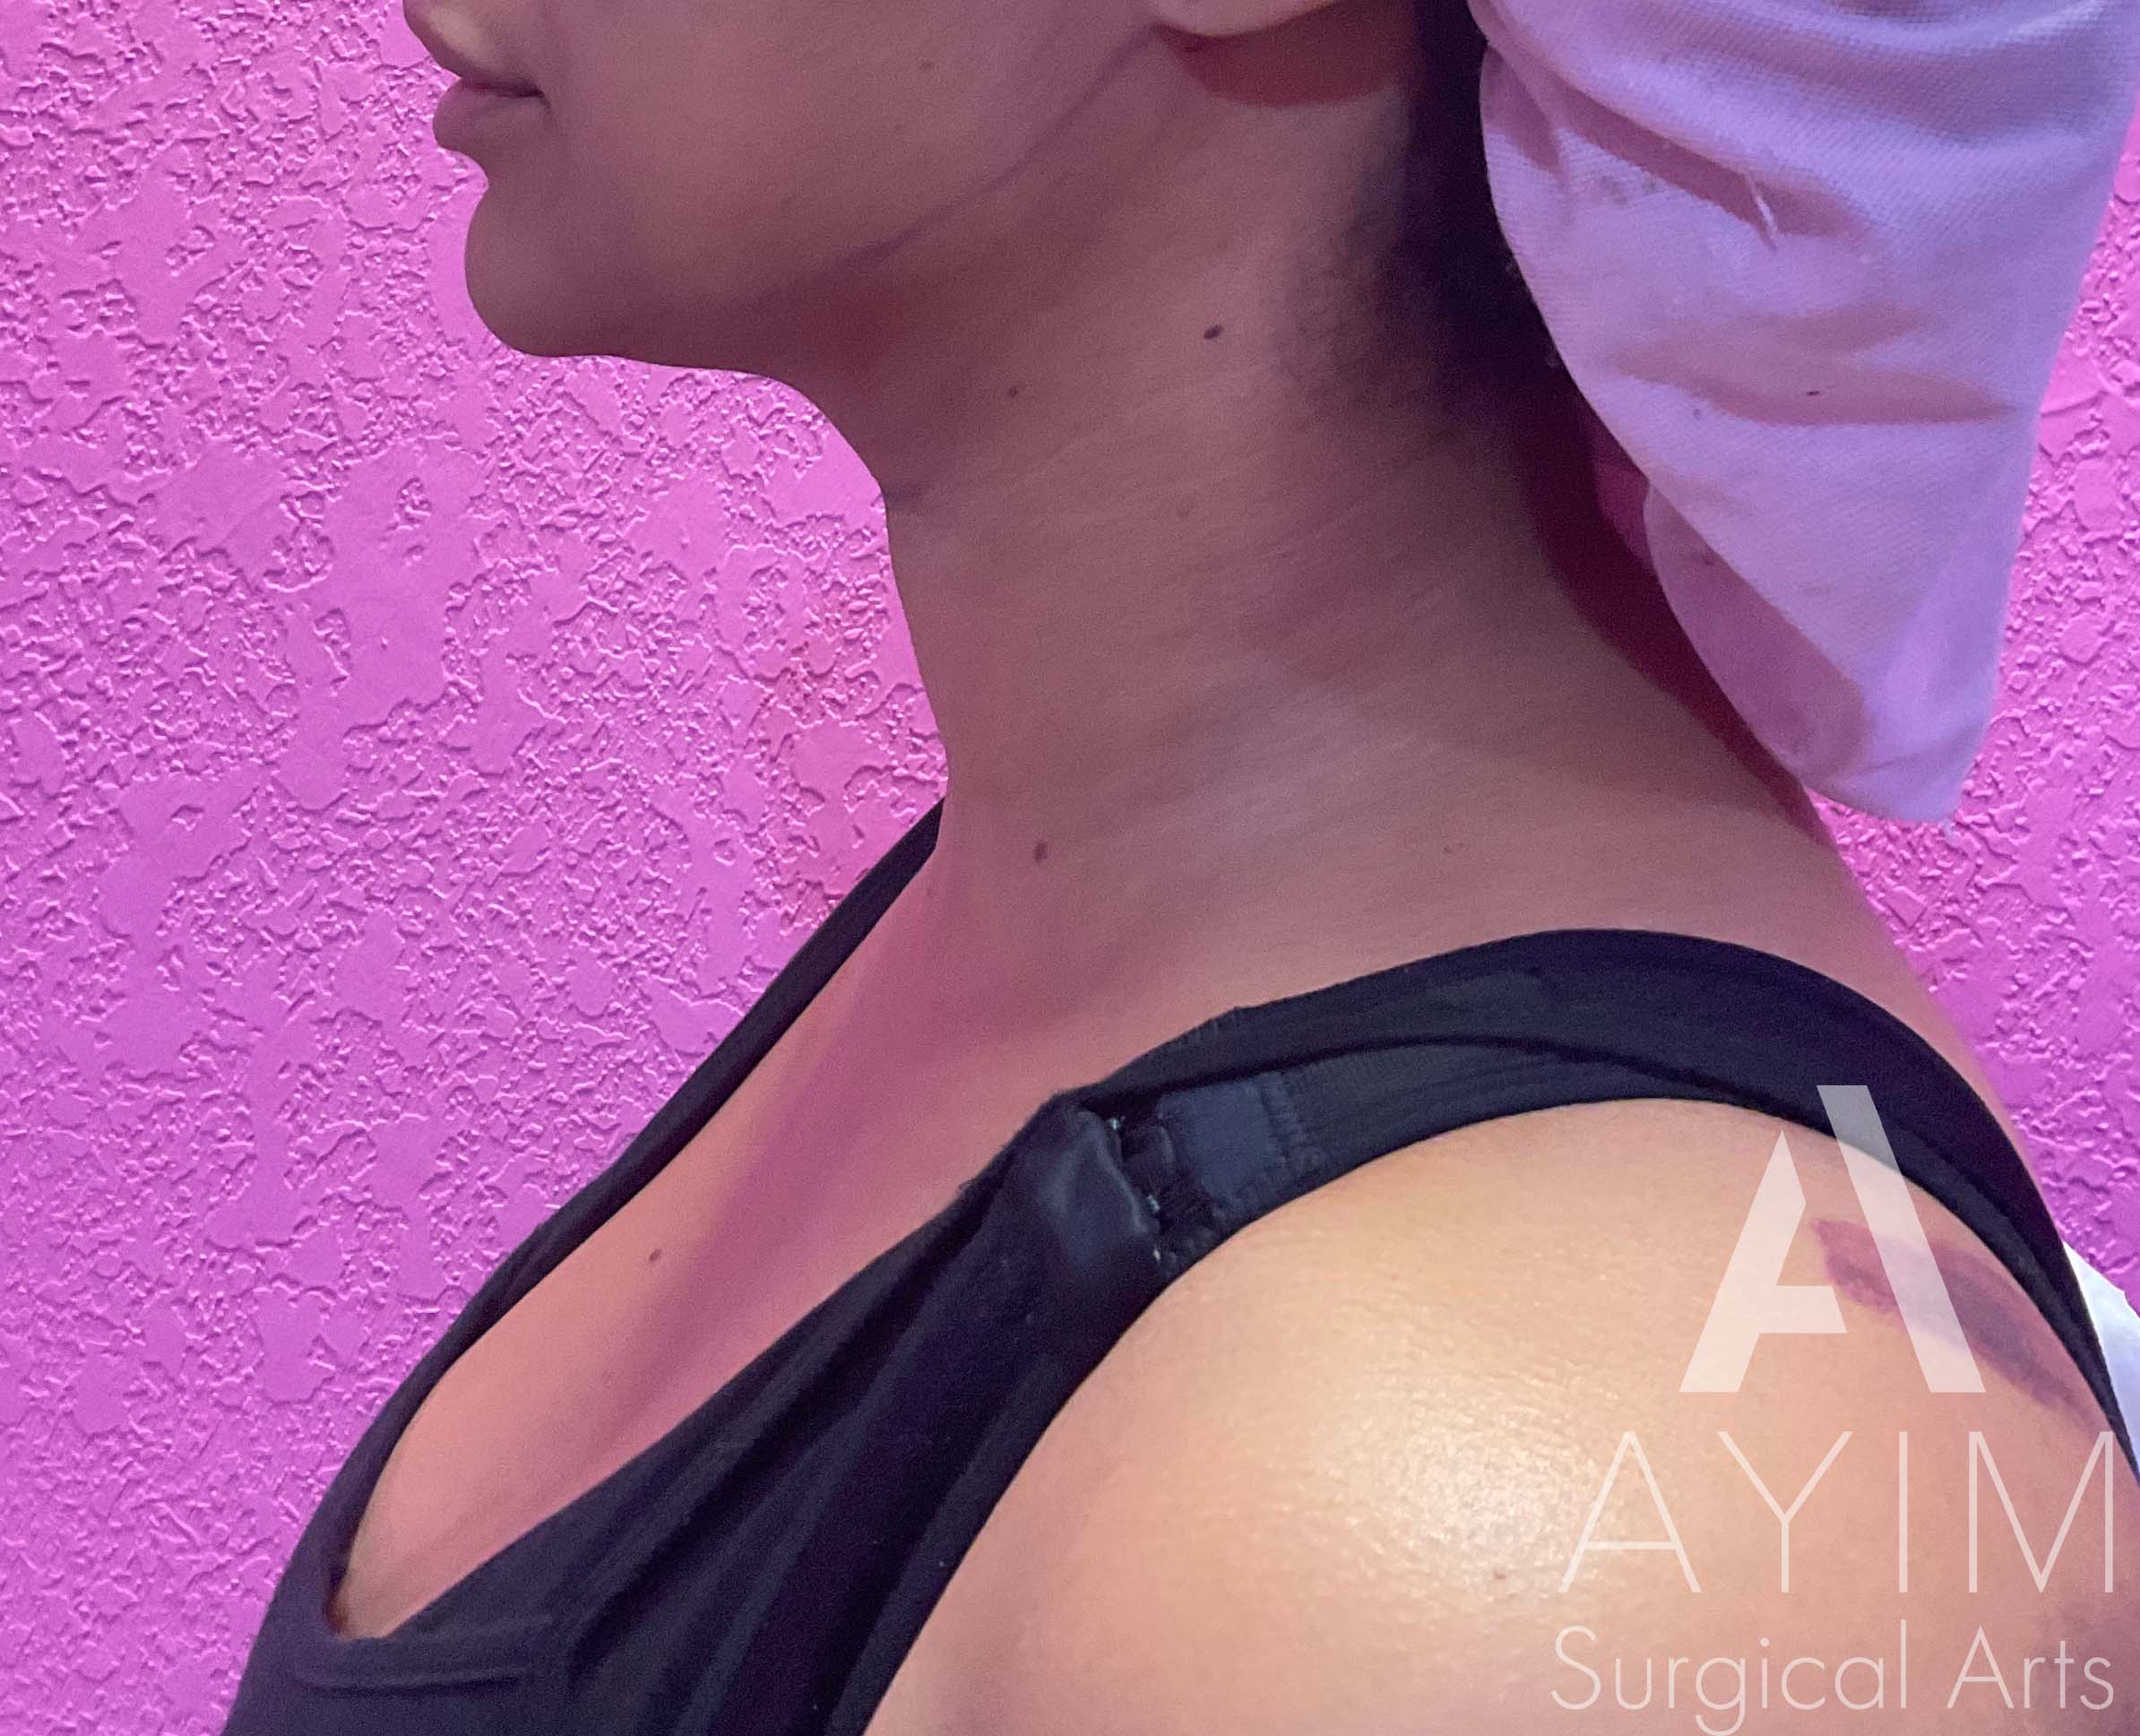 Liposuction of Chin and Neck Before and After Results